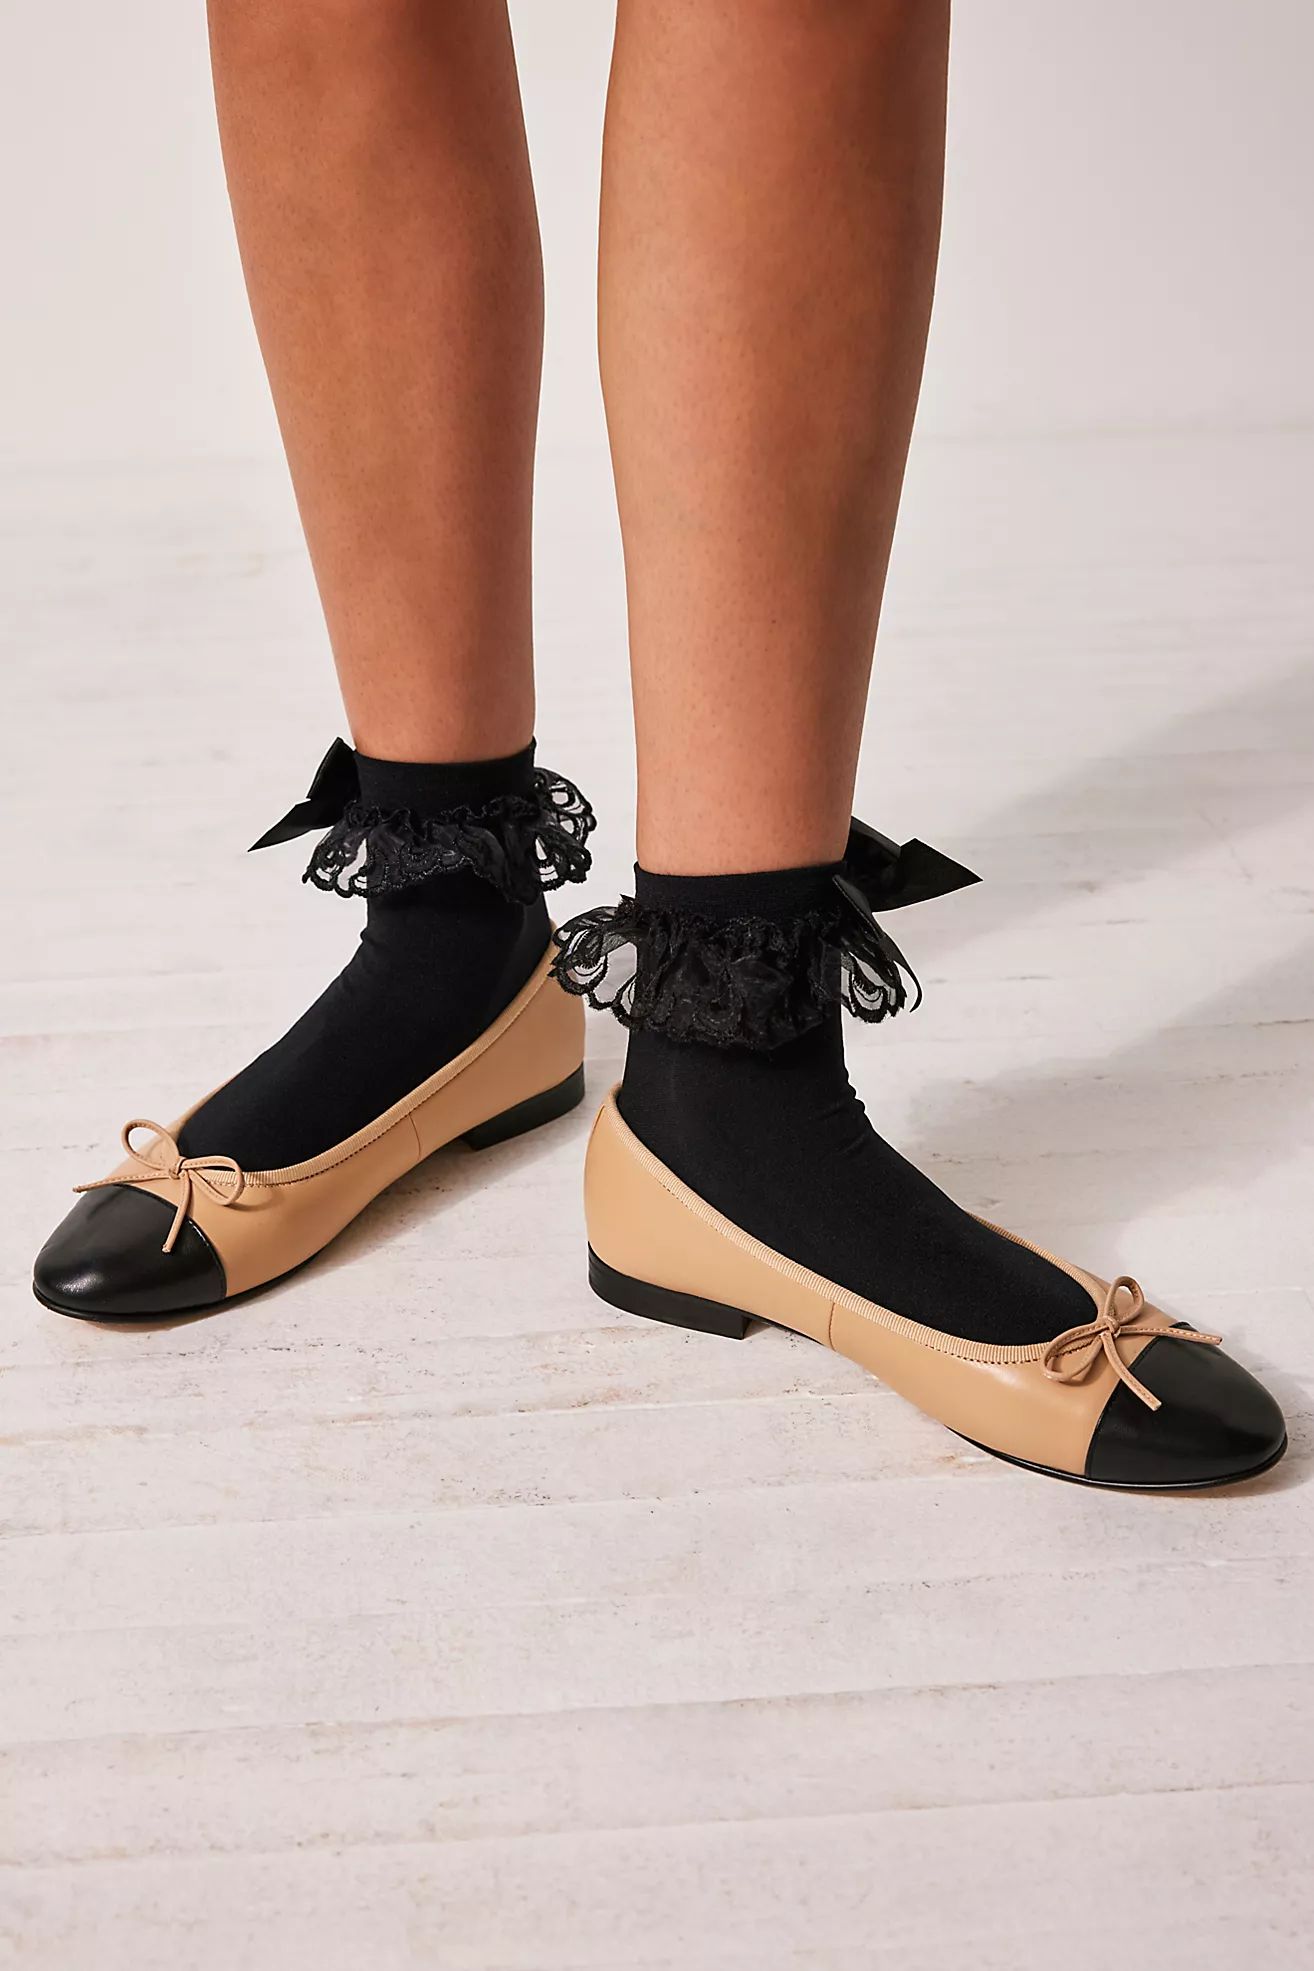 It Takes Two Ballet Flats | Free People (UK)